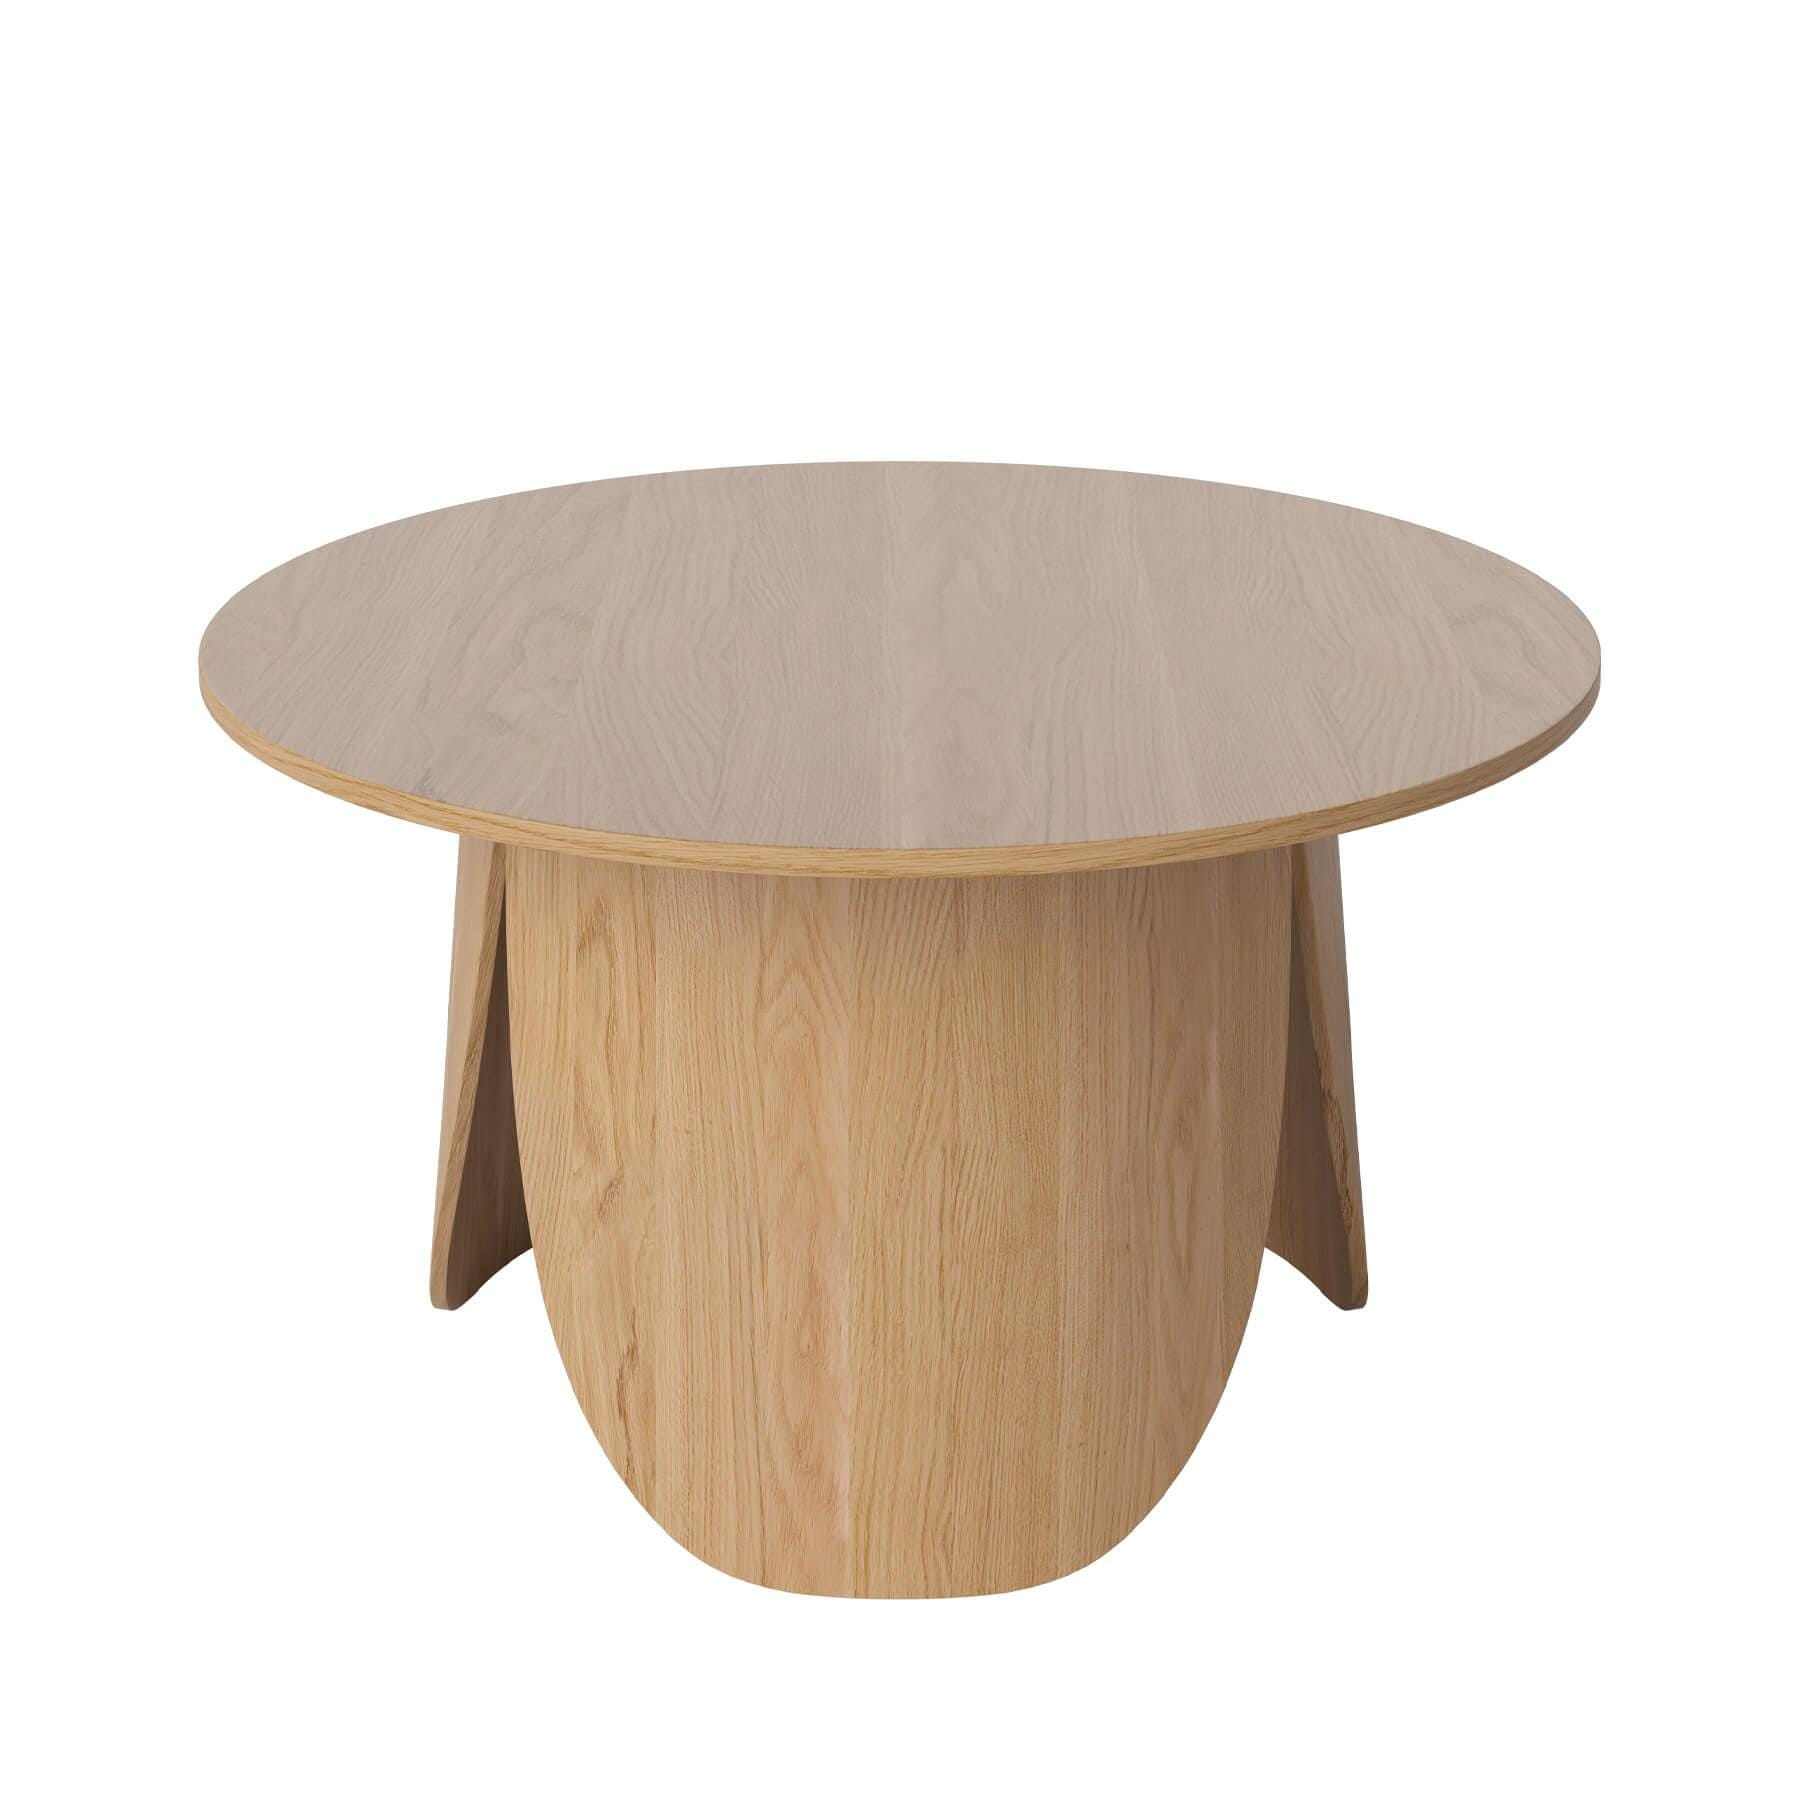 Bolia Peyote Coffee Table Large High Lacquered Oak Light Wood Designer Furniture From Holloways Of Ludlow